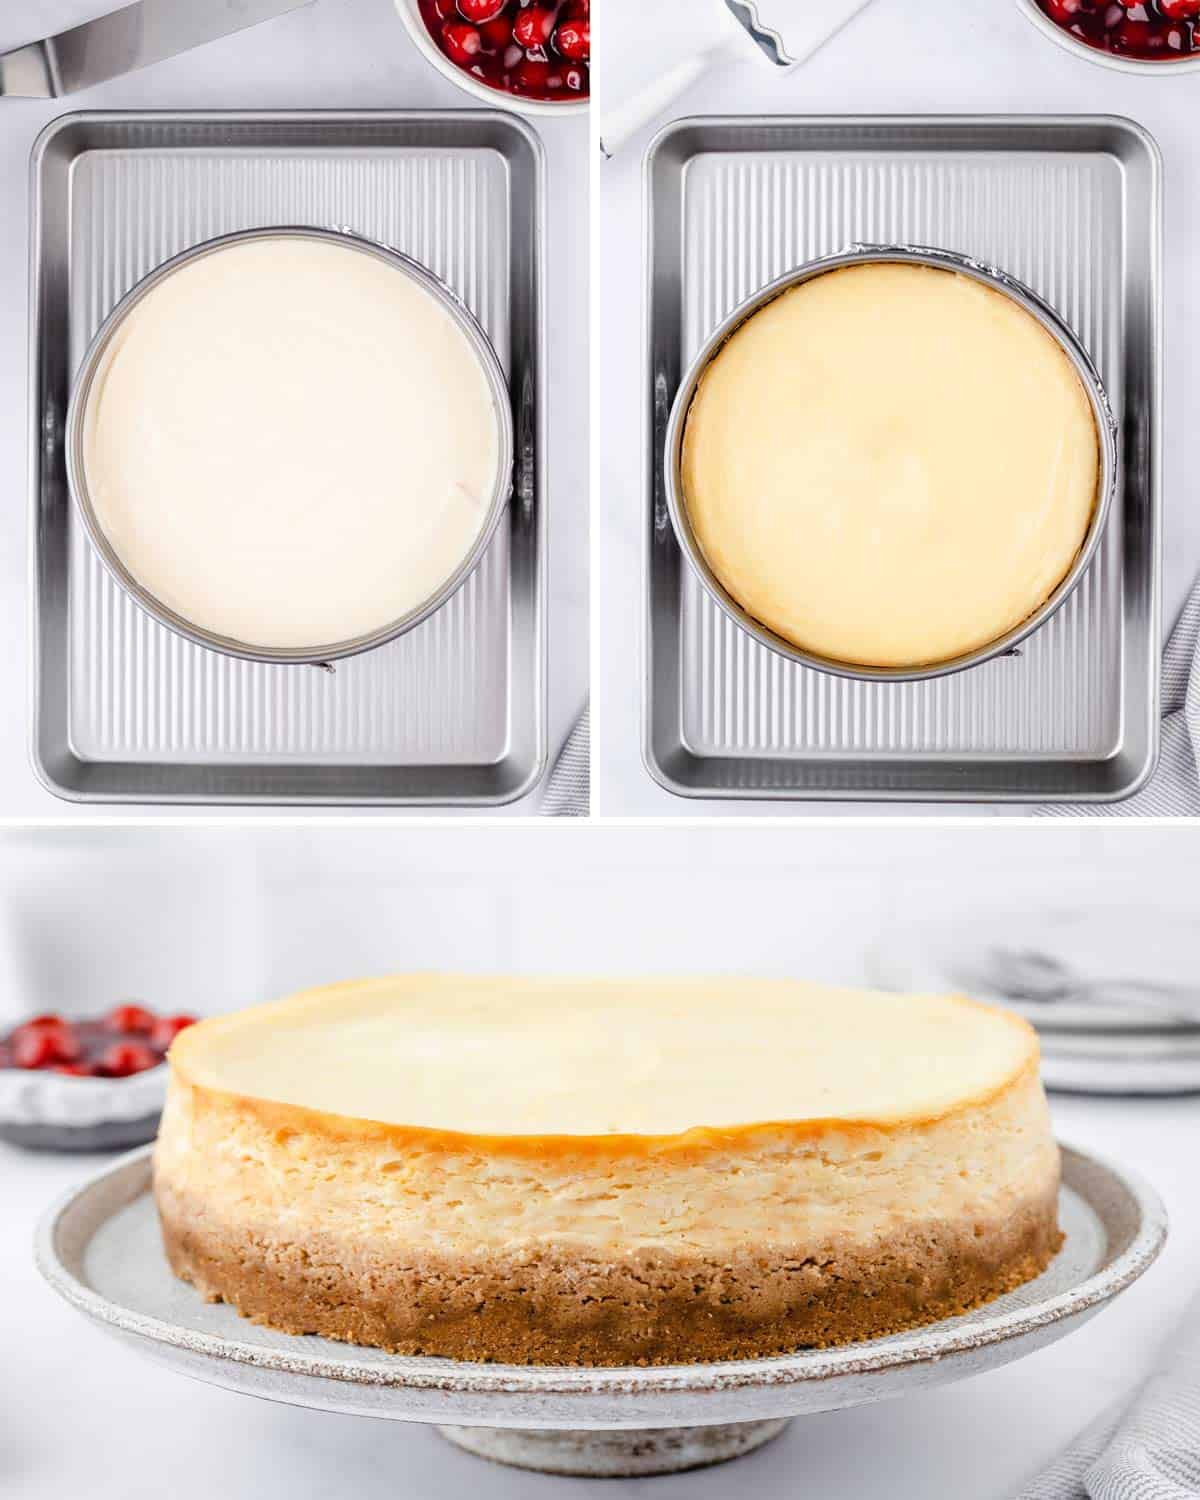 A collage shows how to bake cheesecake.